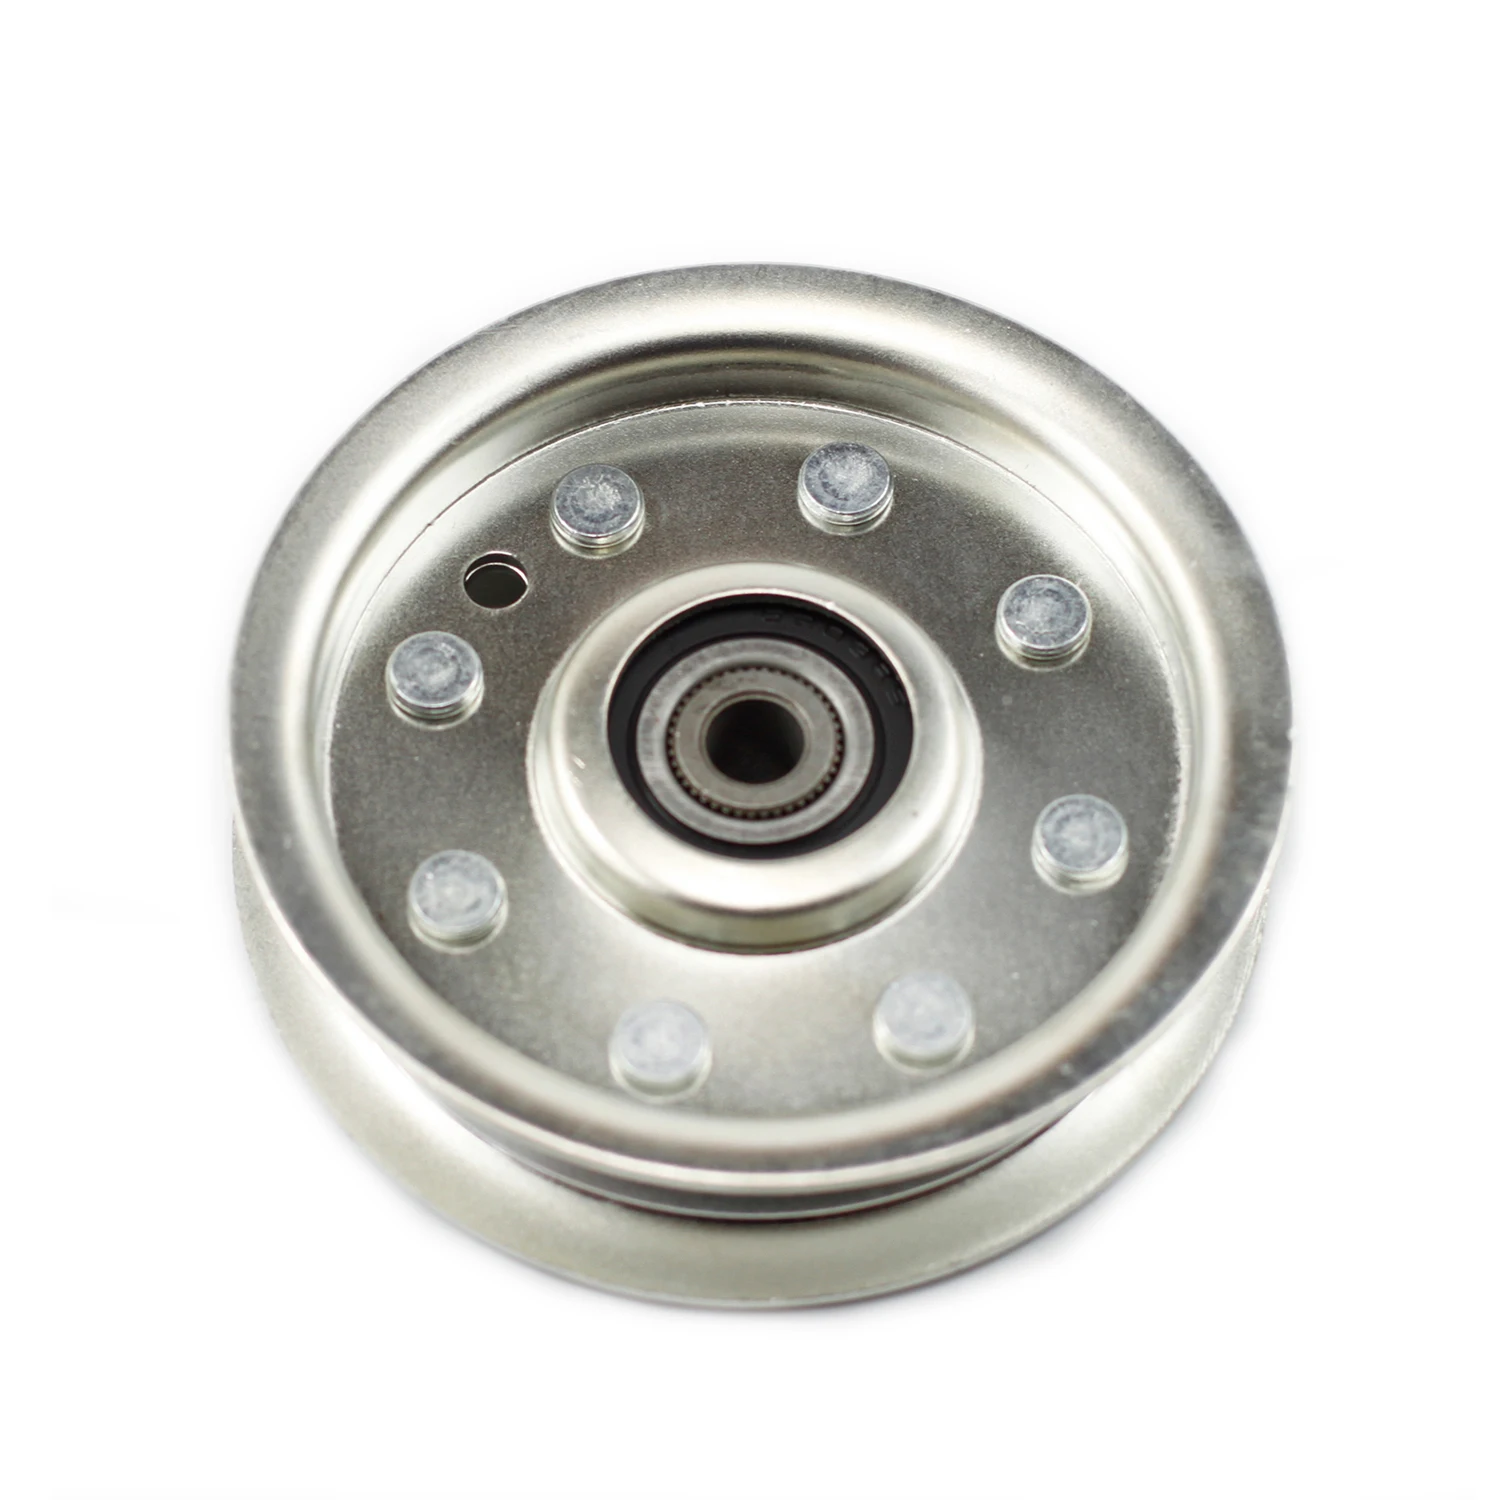 756-0627D Idler pulley replaces MTD No